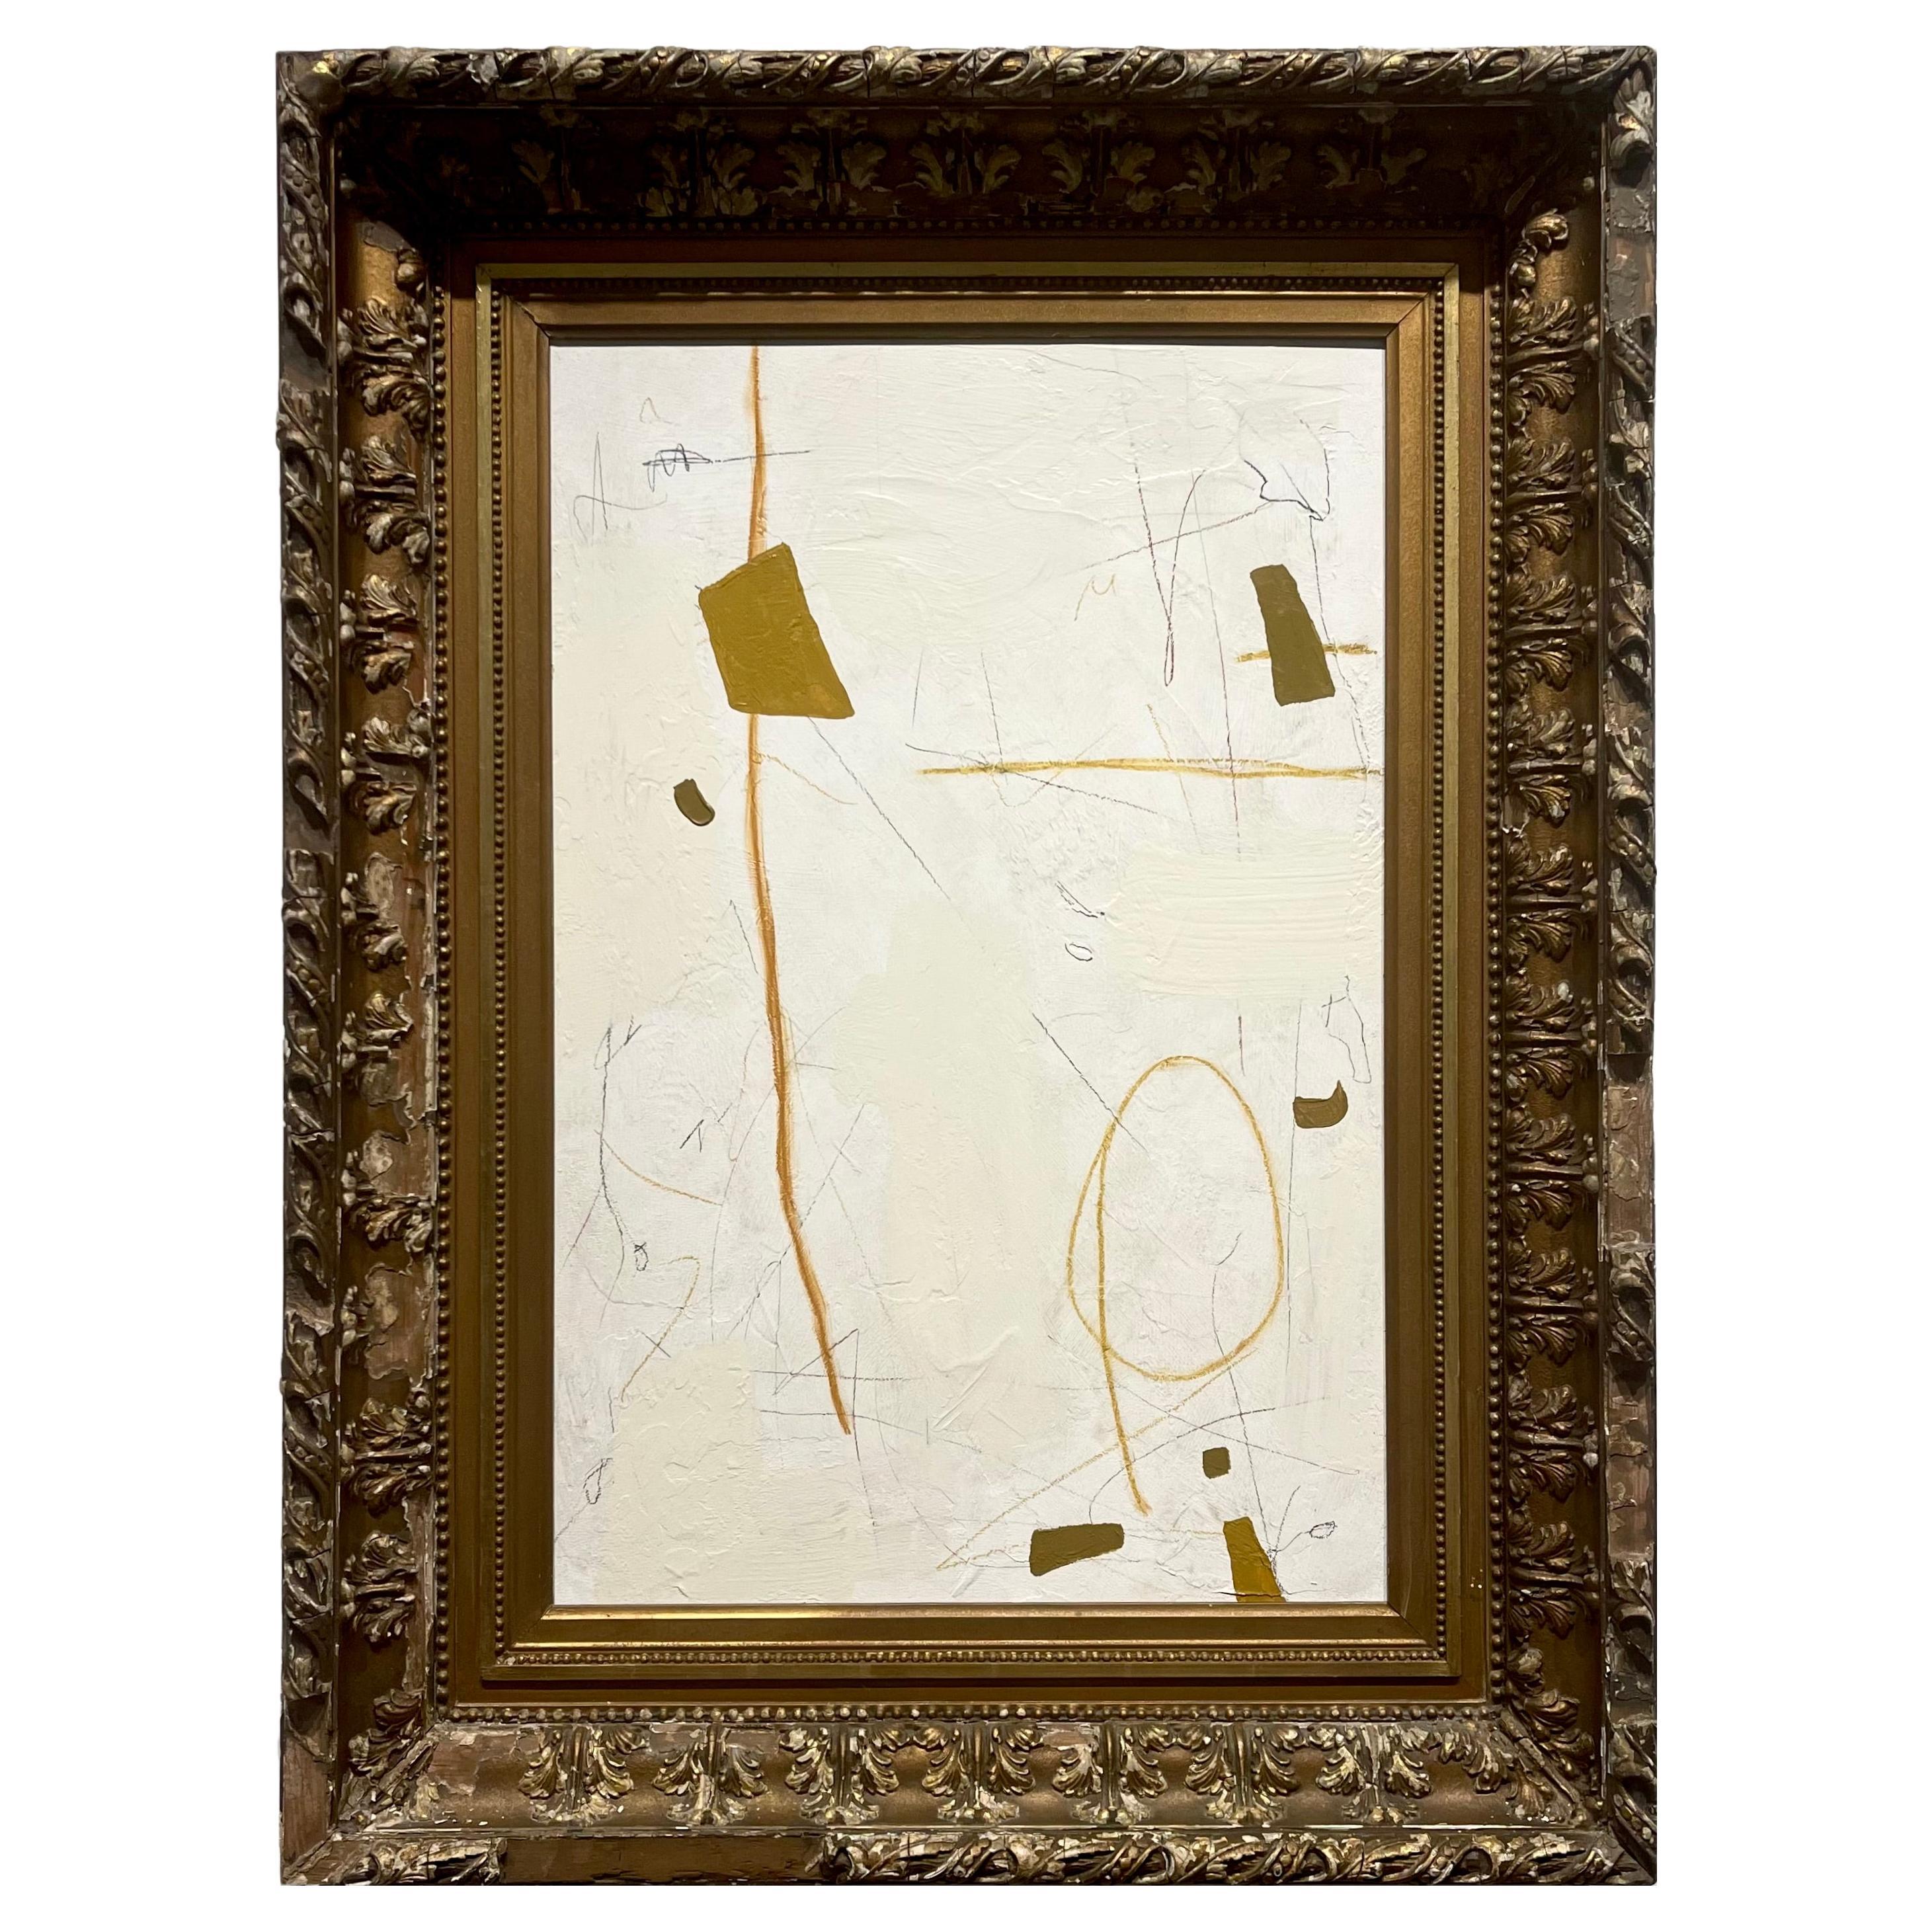 ' Cake ' by artist Murray Duncan, mix media on board, glided vintage frame